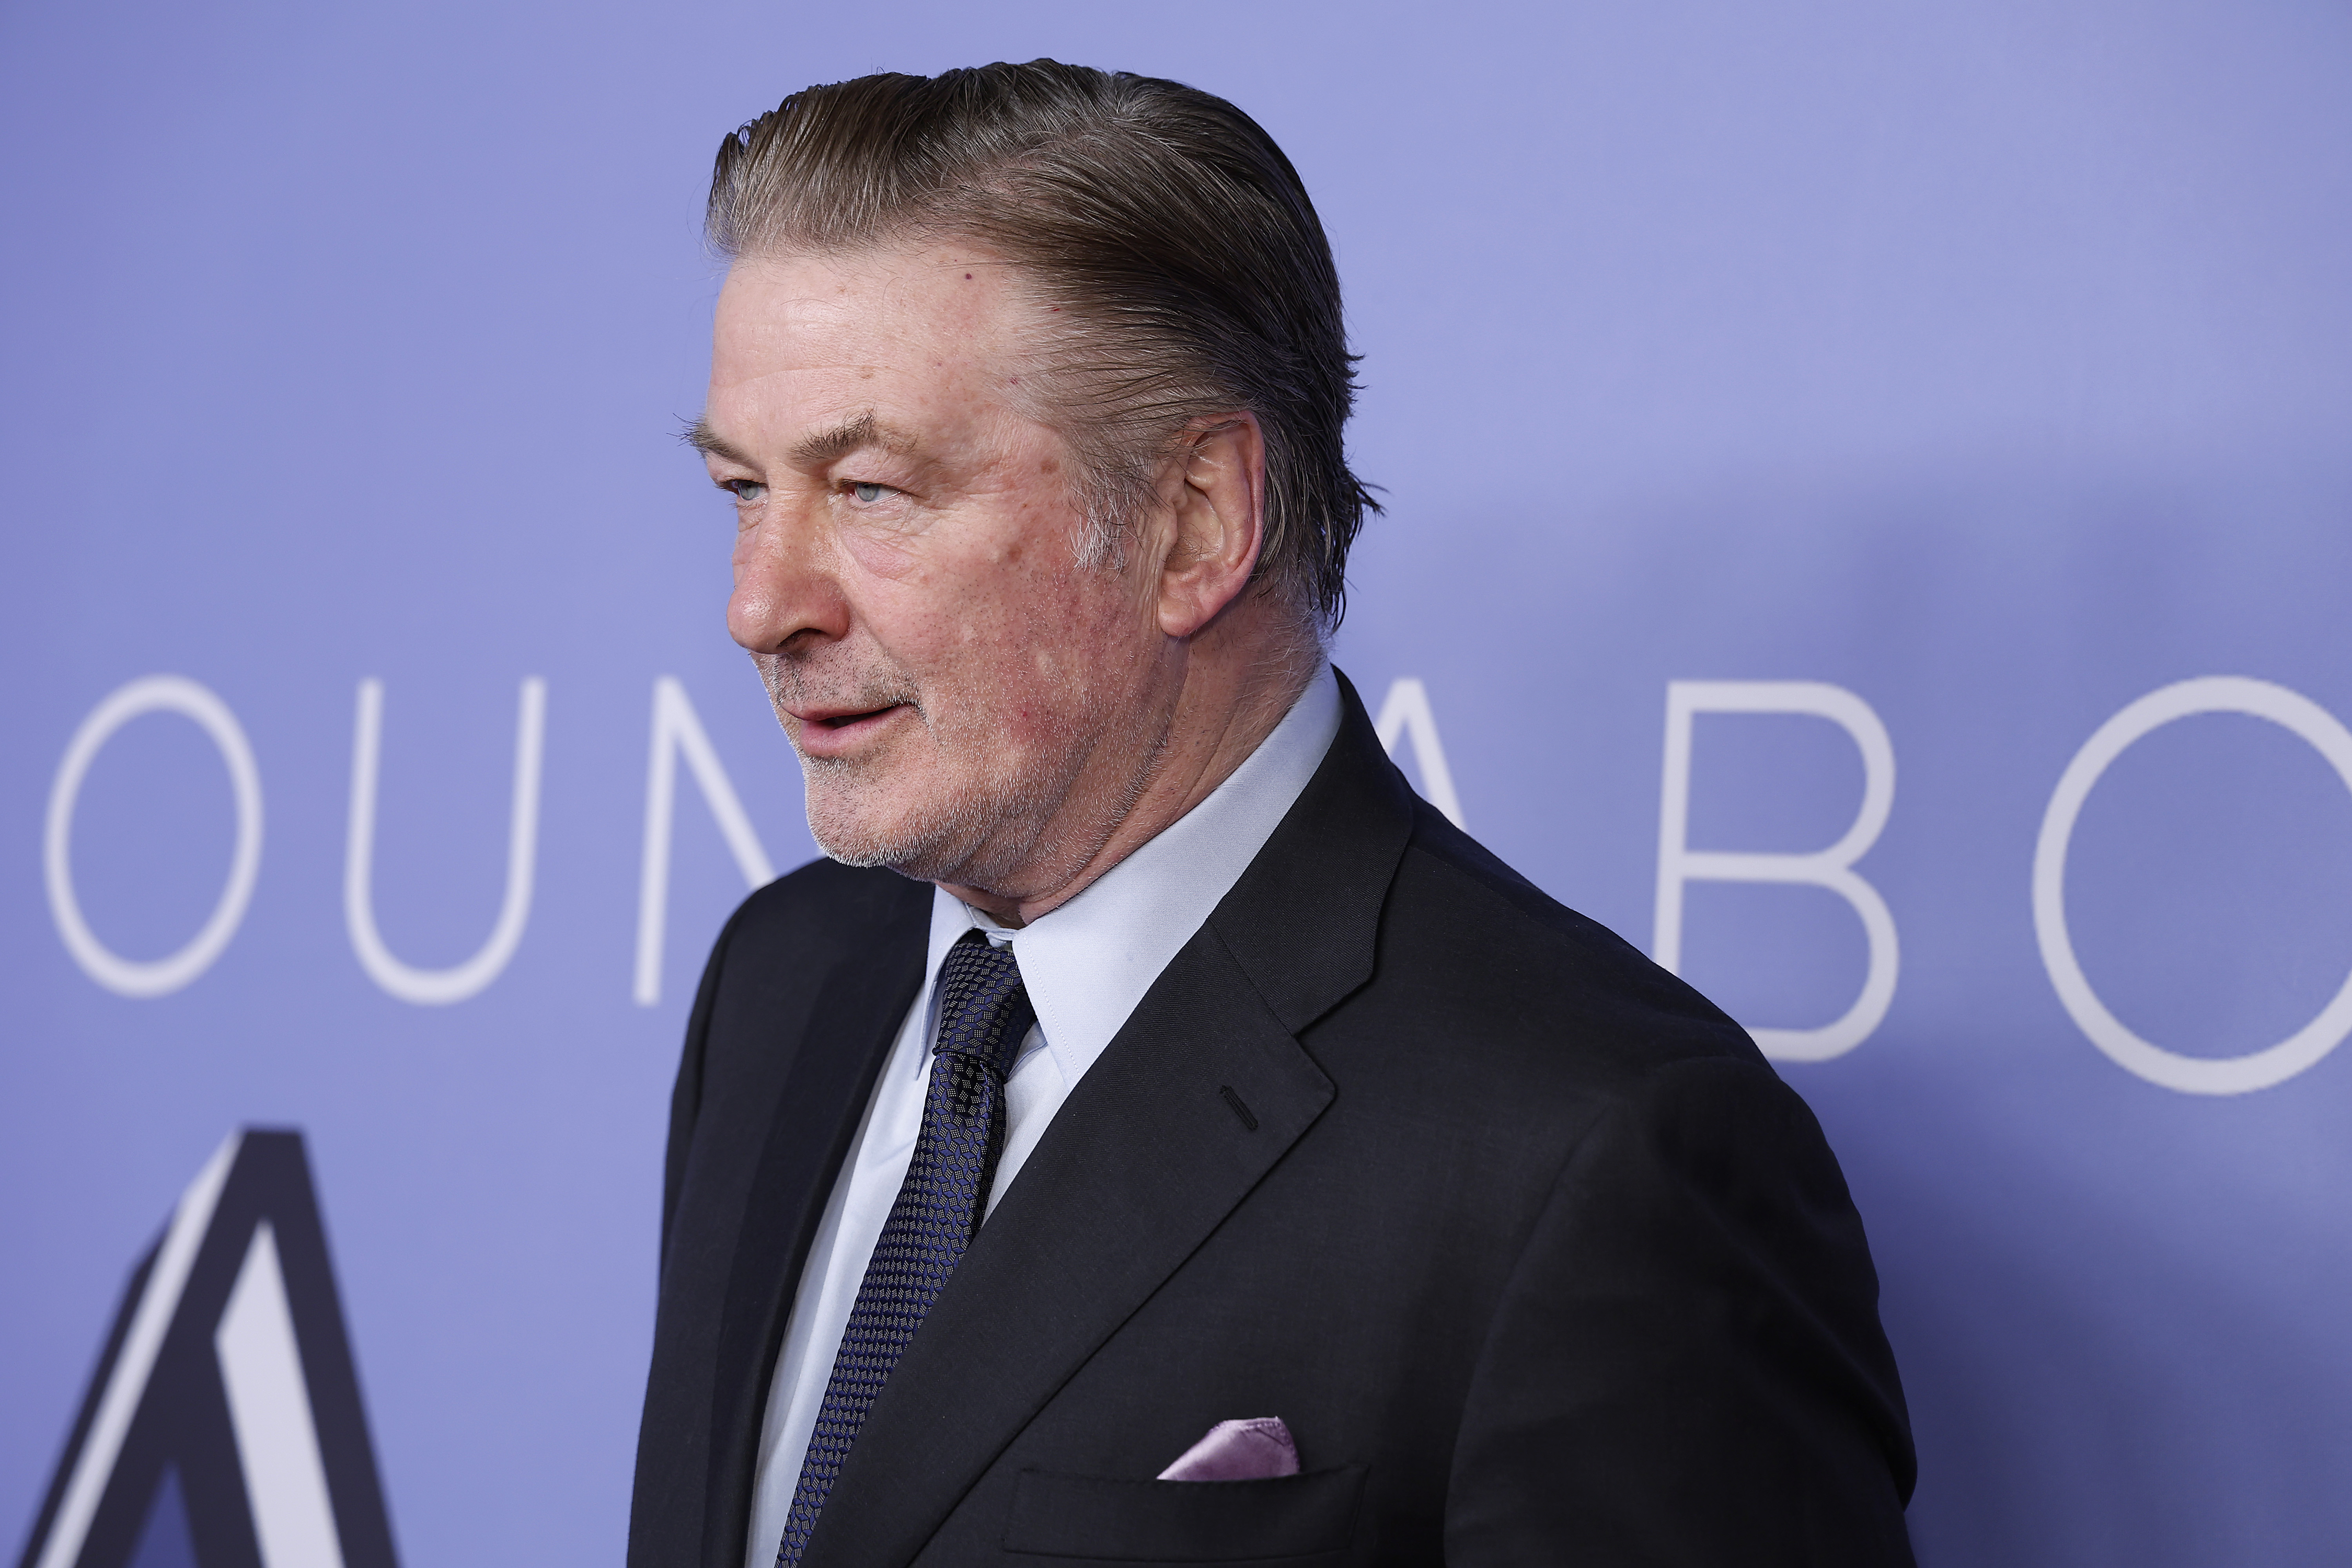 Alec Baldwin could face involuntary manslaughter charges again